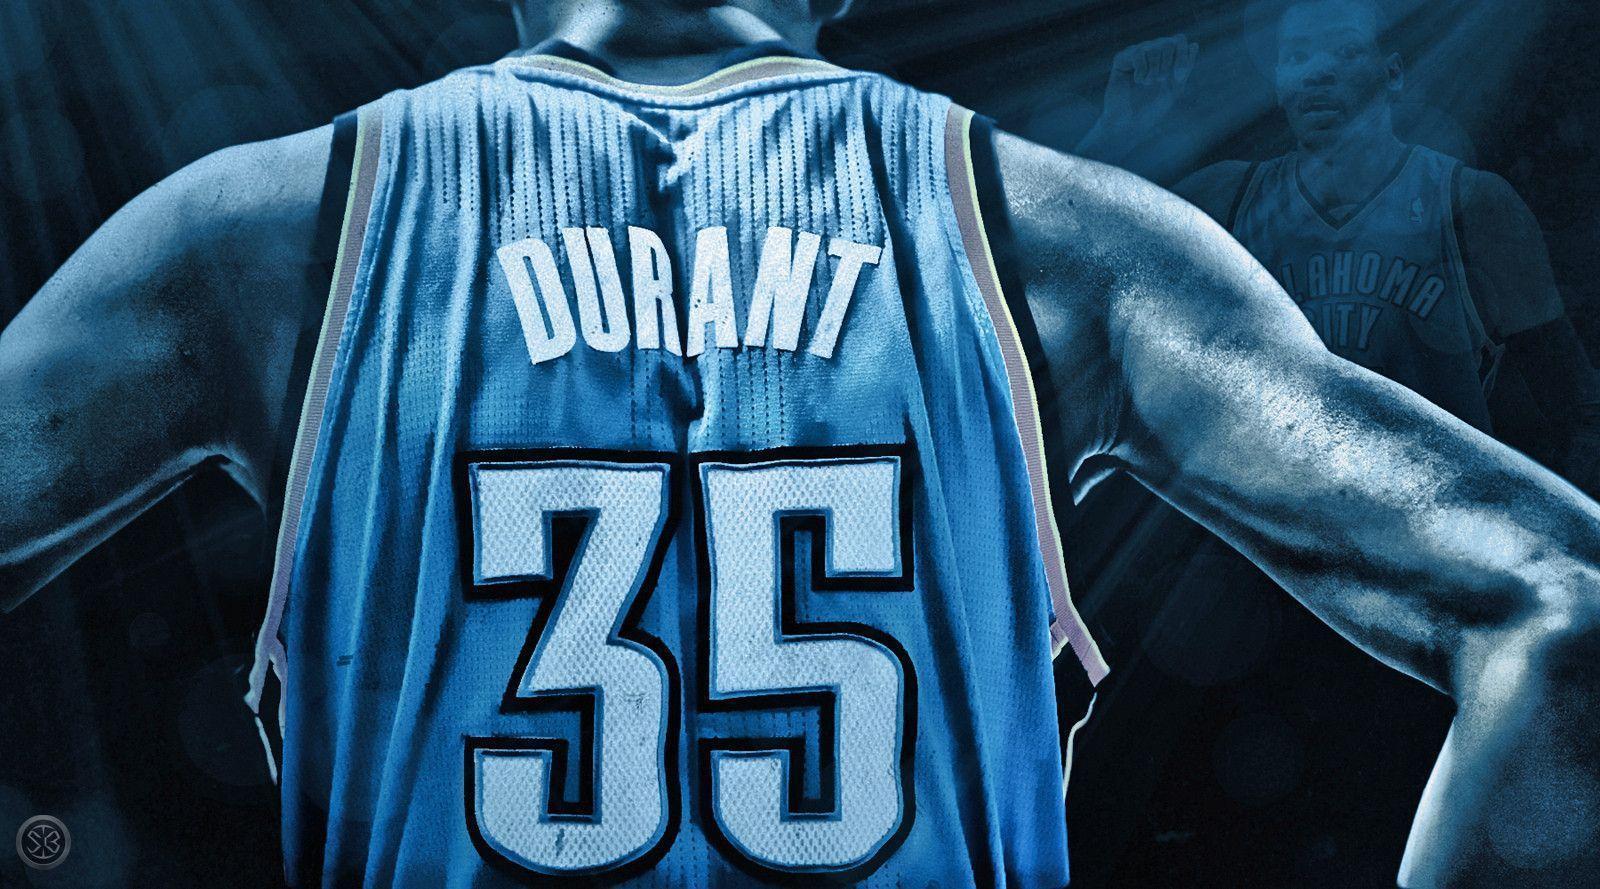 kevin durant HD wallpaper for tablet. Wallput